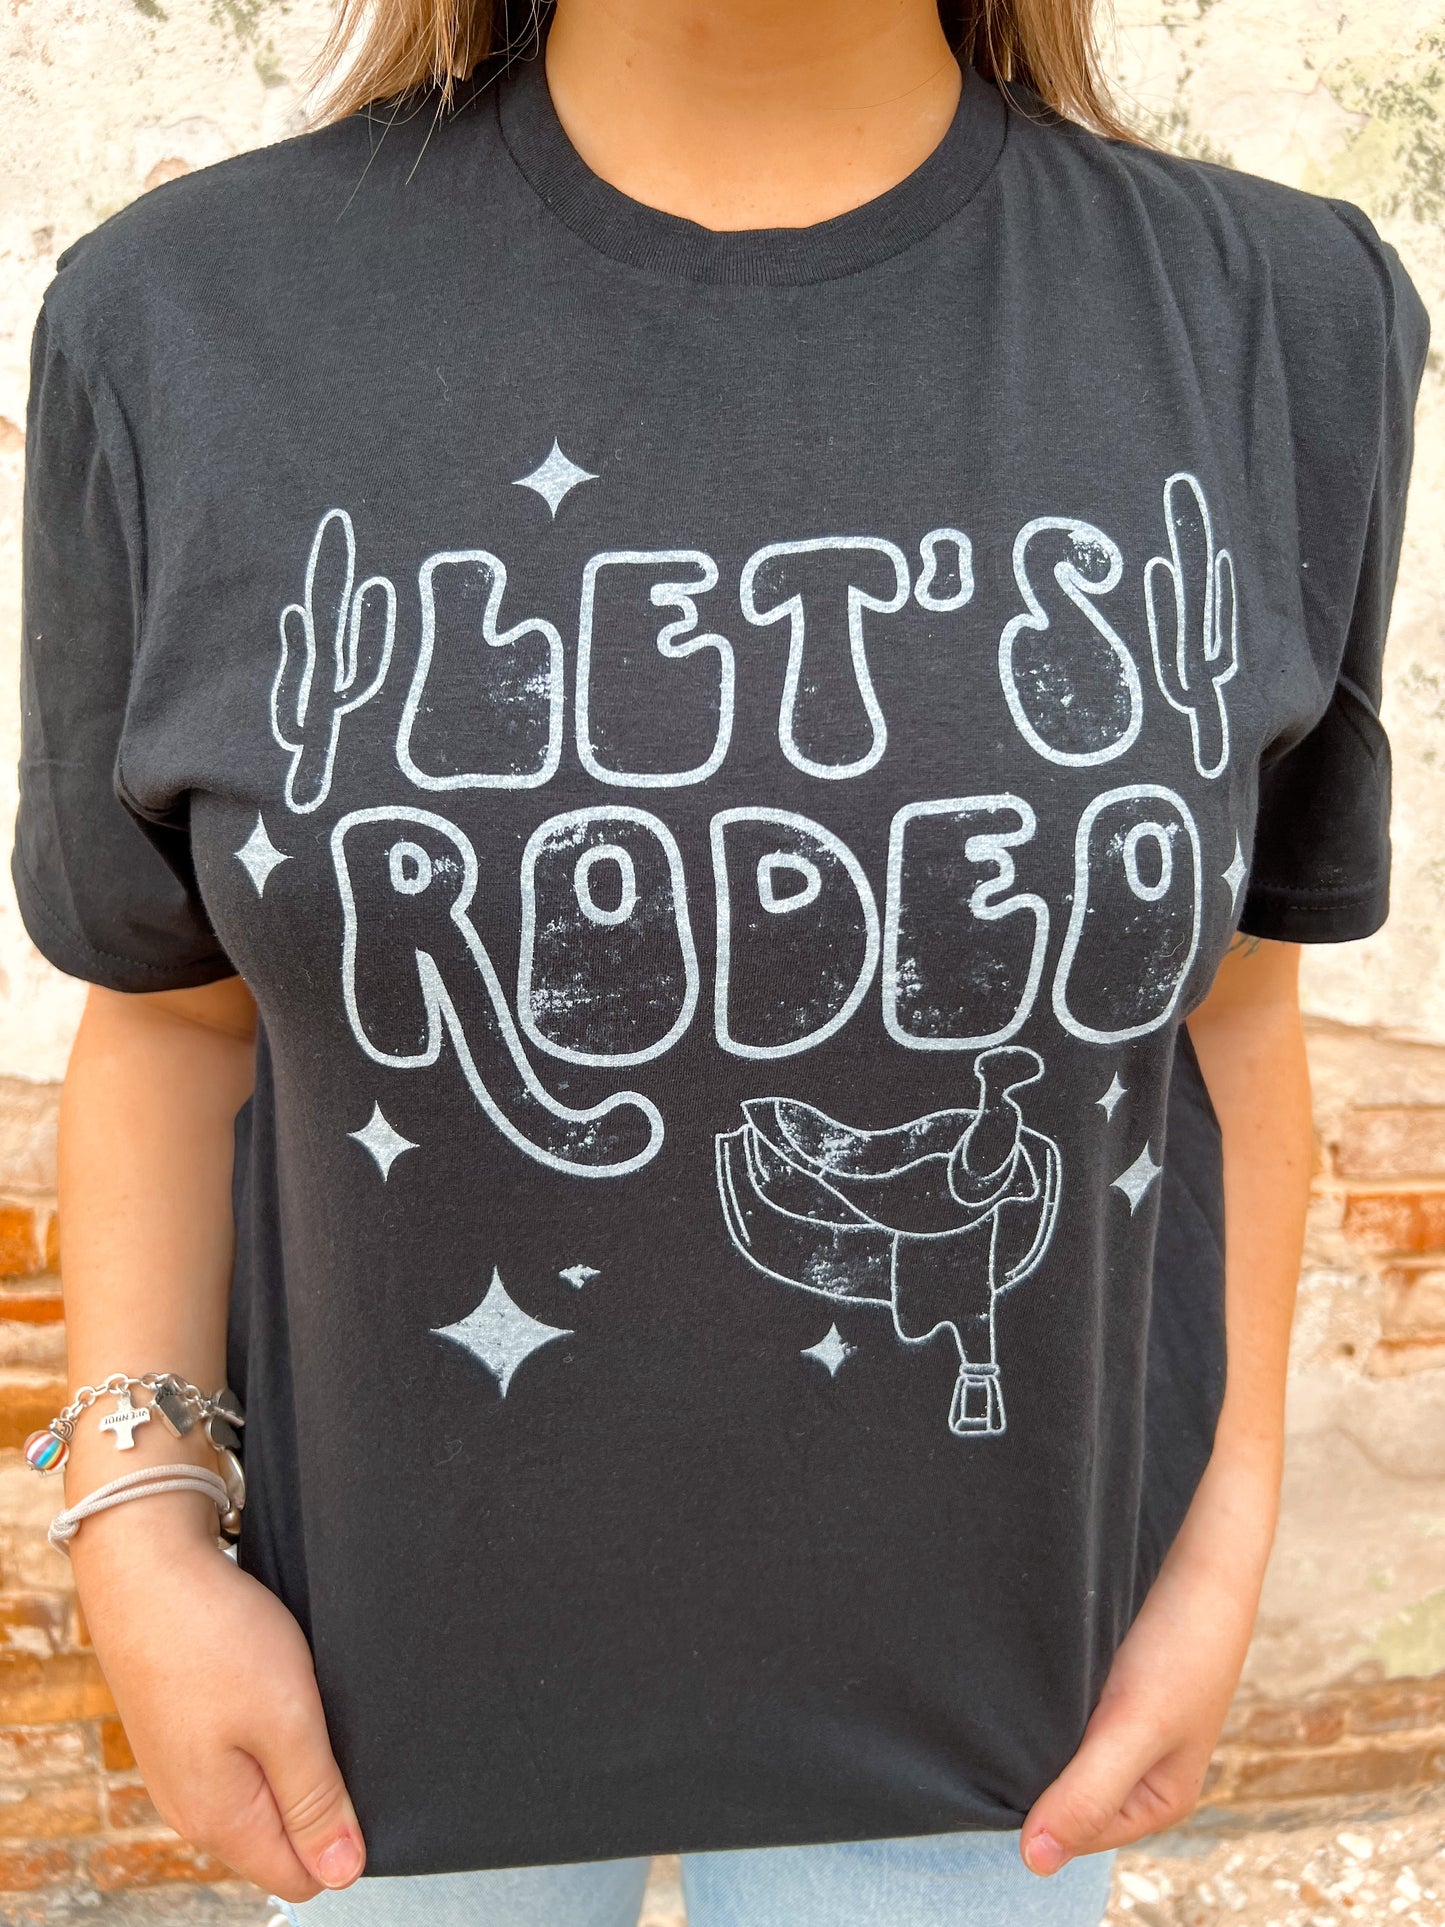 Let's Rodeo with stars and saddle - Black Tee-Top-the lattimore claim-09/12/23-The Twisted Chandelier